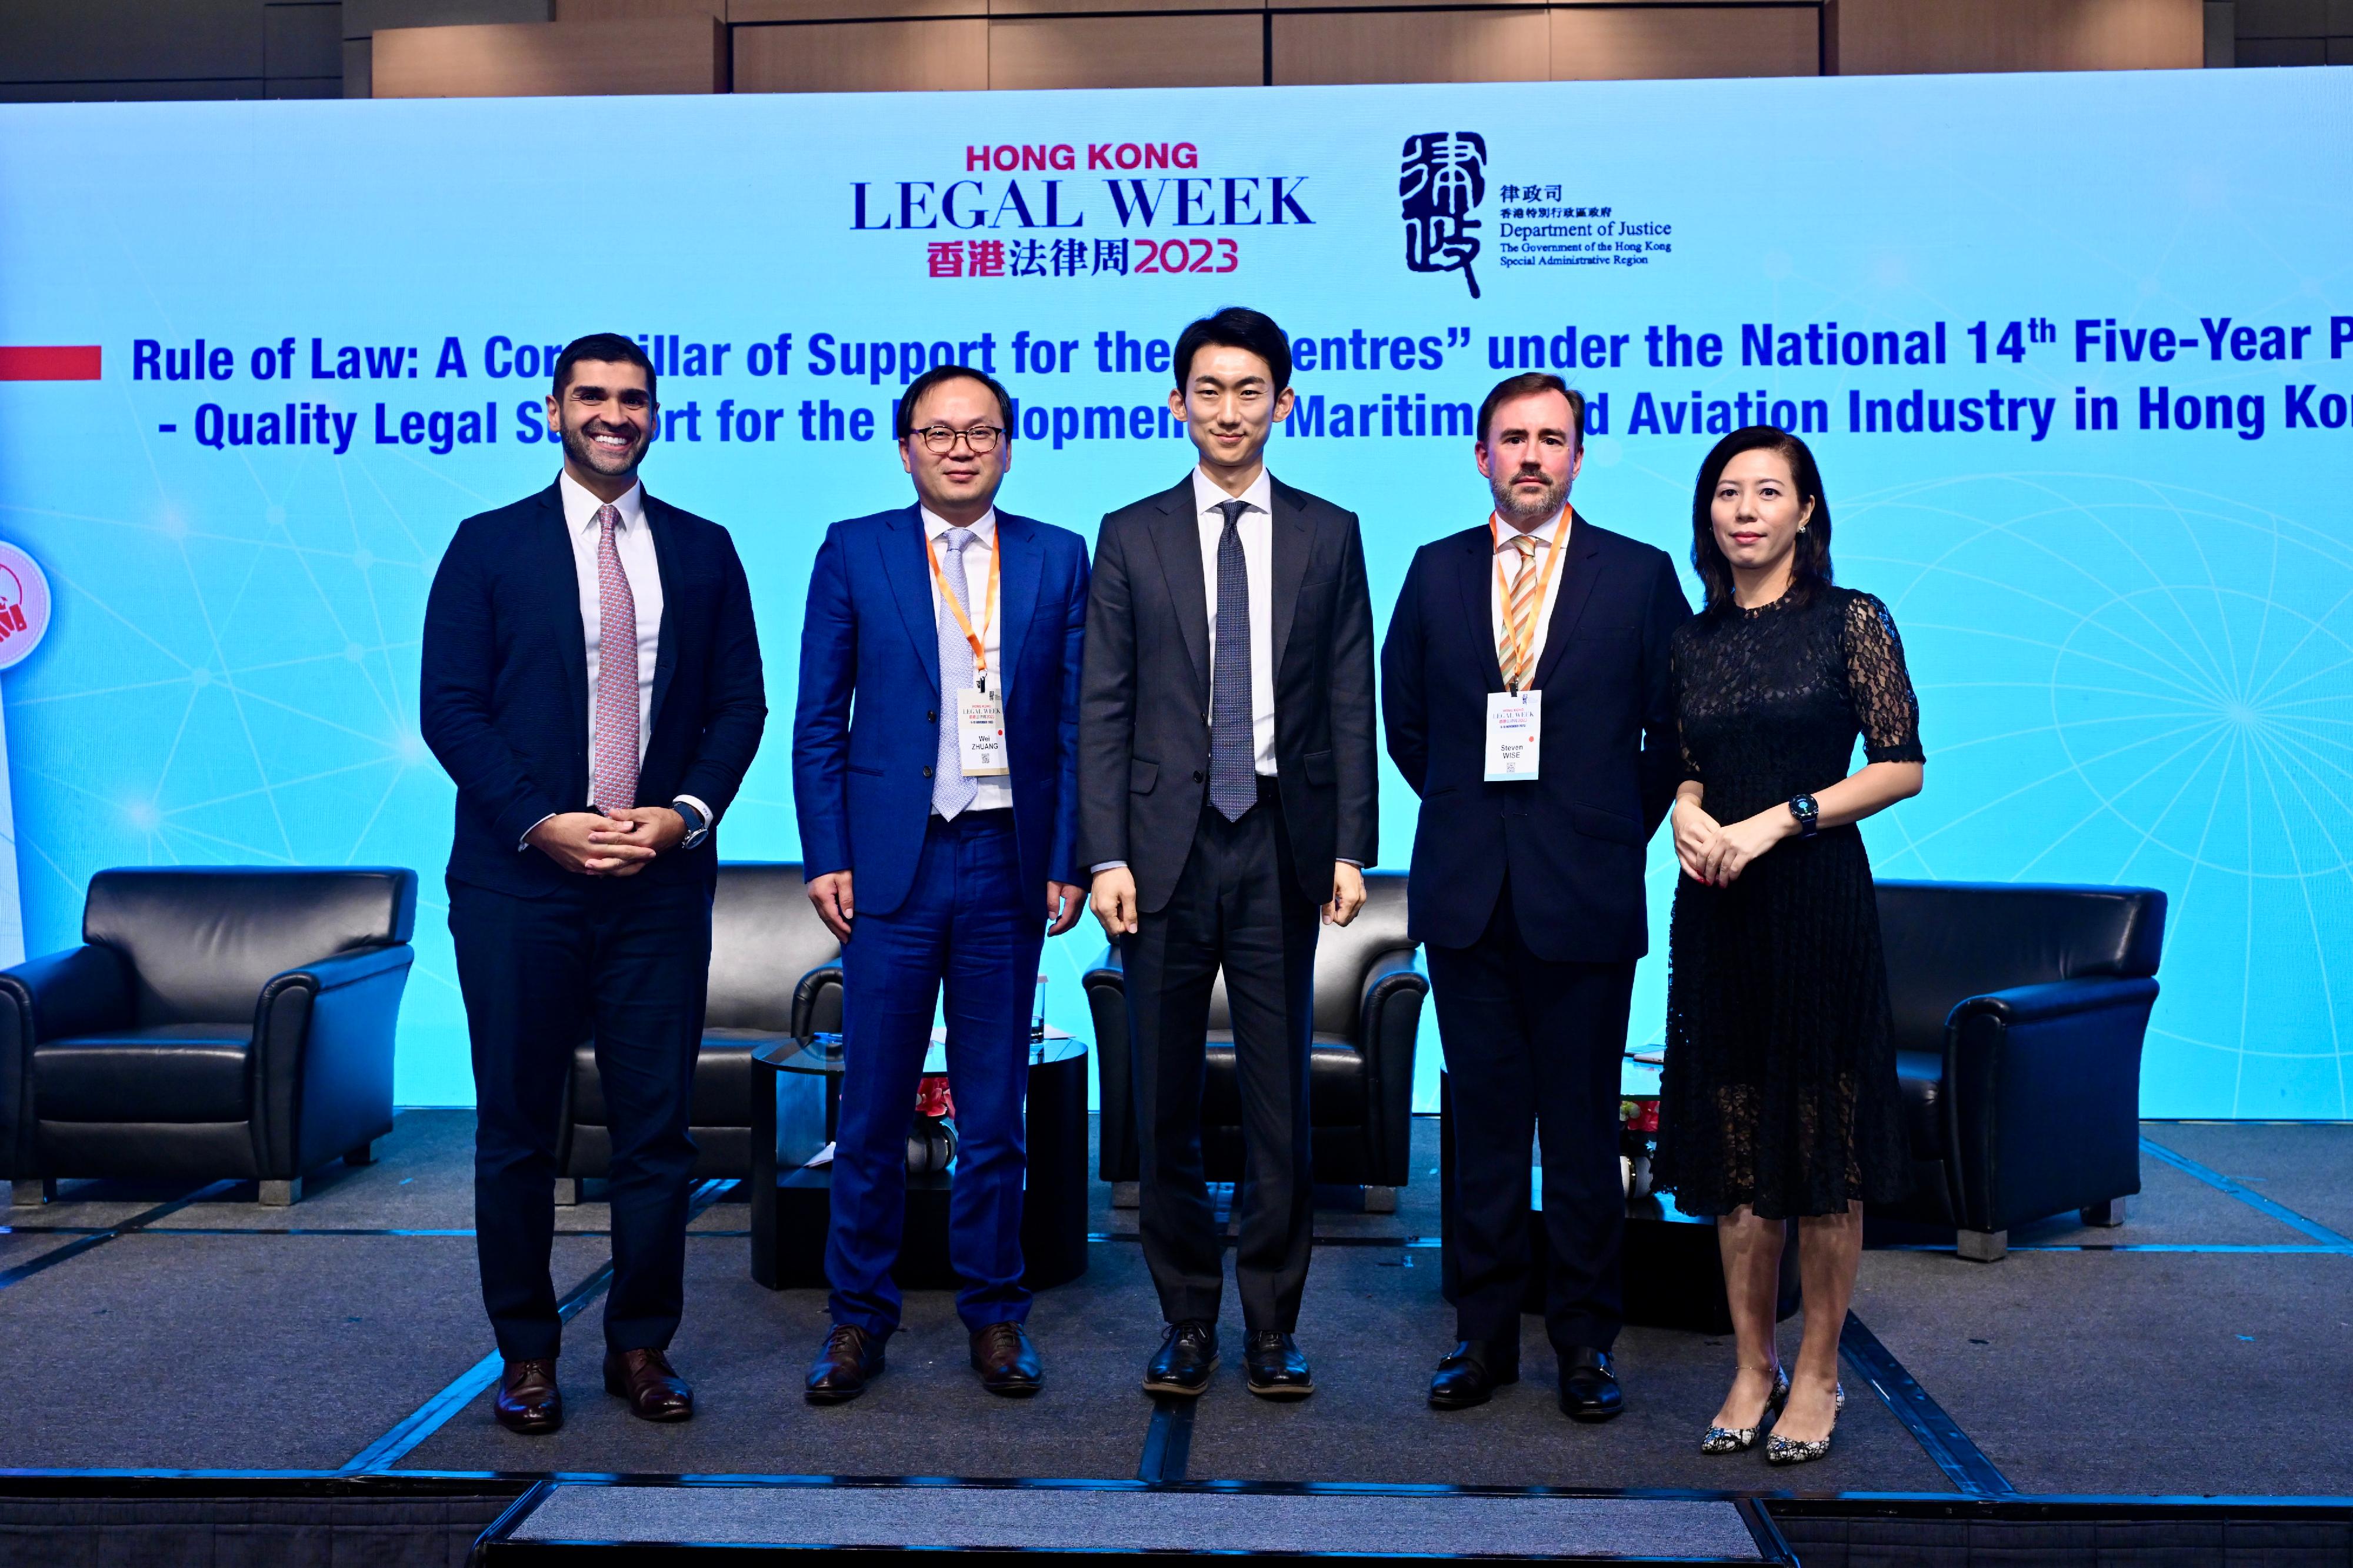 Hong Kong Legal Week 2023, an annual flagship event of the legal sector and the Department of Justice, successfully concluded today (November 10). Photo shows (from right) the President of the Hong Kong Logistics Association, Ms Elsa Yuen; Partner, Lau, Horton and Wise LLP Mr Steven Wise; Associate Professor, Assistant Dean (Undergraduate Studies) and Programme Director (LLB) of the Faculty of Law of the Chinese University of Hong Kong Professor Lee Jae Woon; Regional Manager, Asia of BIMCO Mr Wei Zhuang; and Global Head of Aviation and Marine, Senior Partner, Withersworldwide and Chairperson of The Hague Court of Arbitration for Aviation Mr Paul Jebely, at the panel discussion: Rule of Law: A Core Pillar of Support for the "8 Centres" under the National 14th Five-Year Plan - Quality Legal Support for the Development of Maritime and Aviation Industry in Hong Kong at the Rule of Law for the Future.

